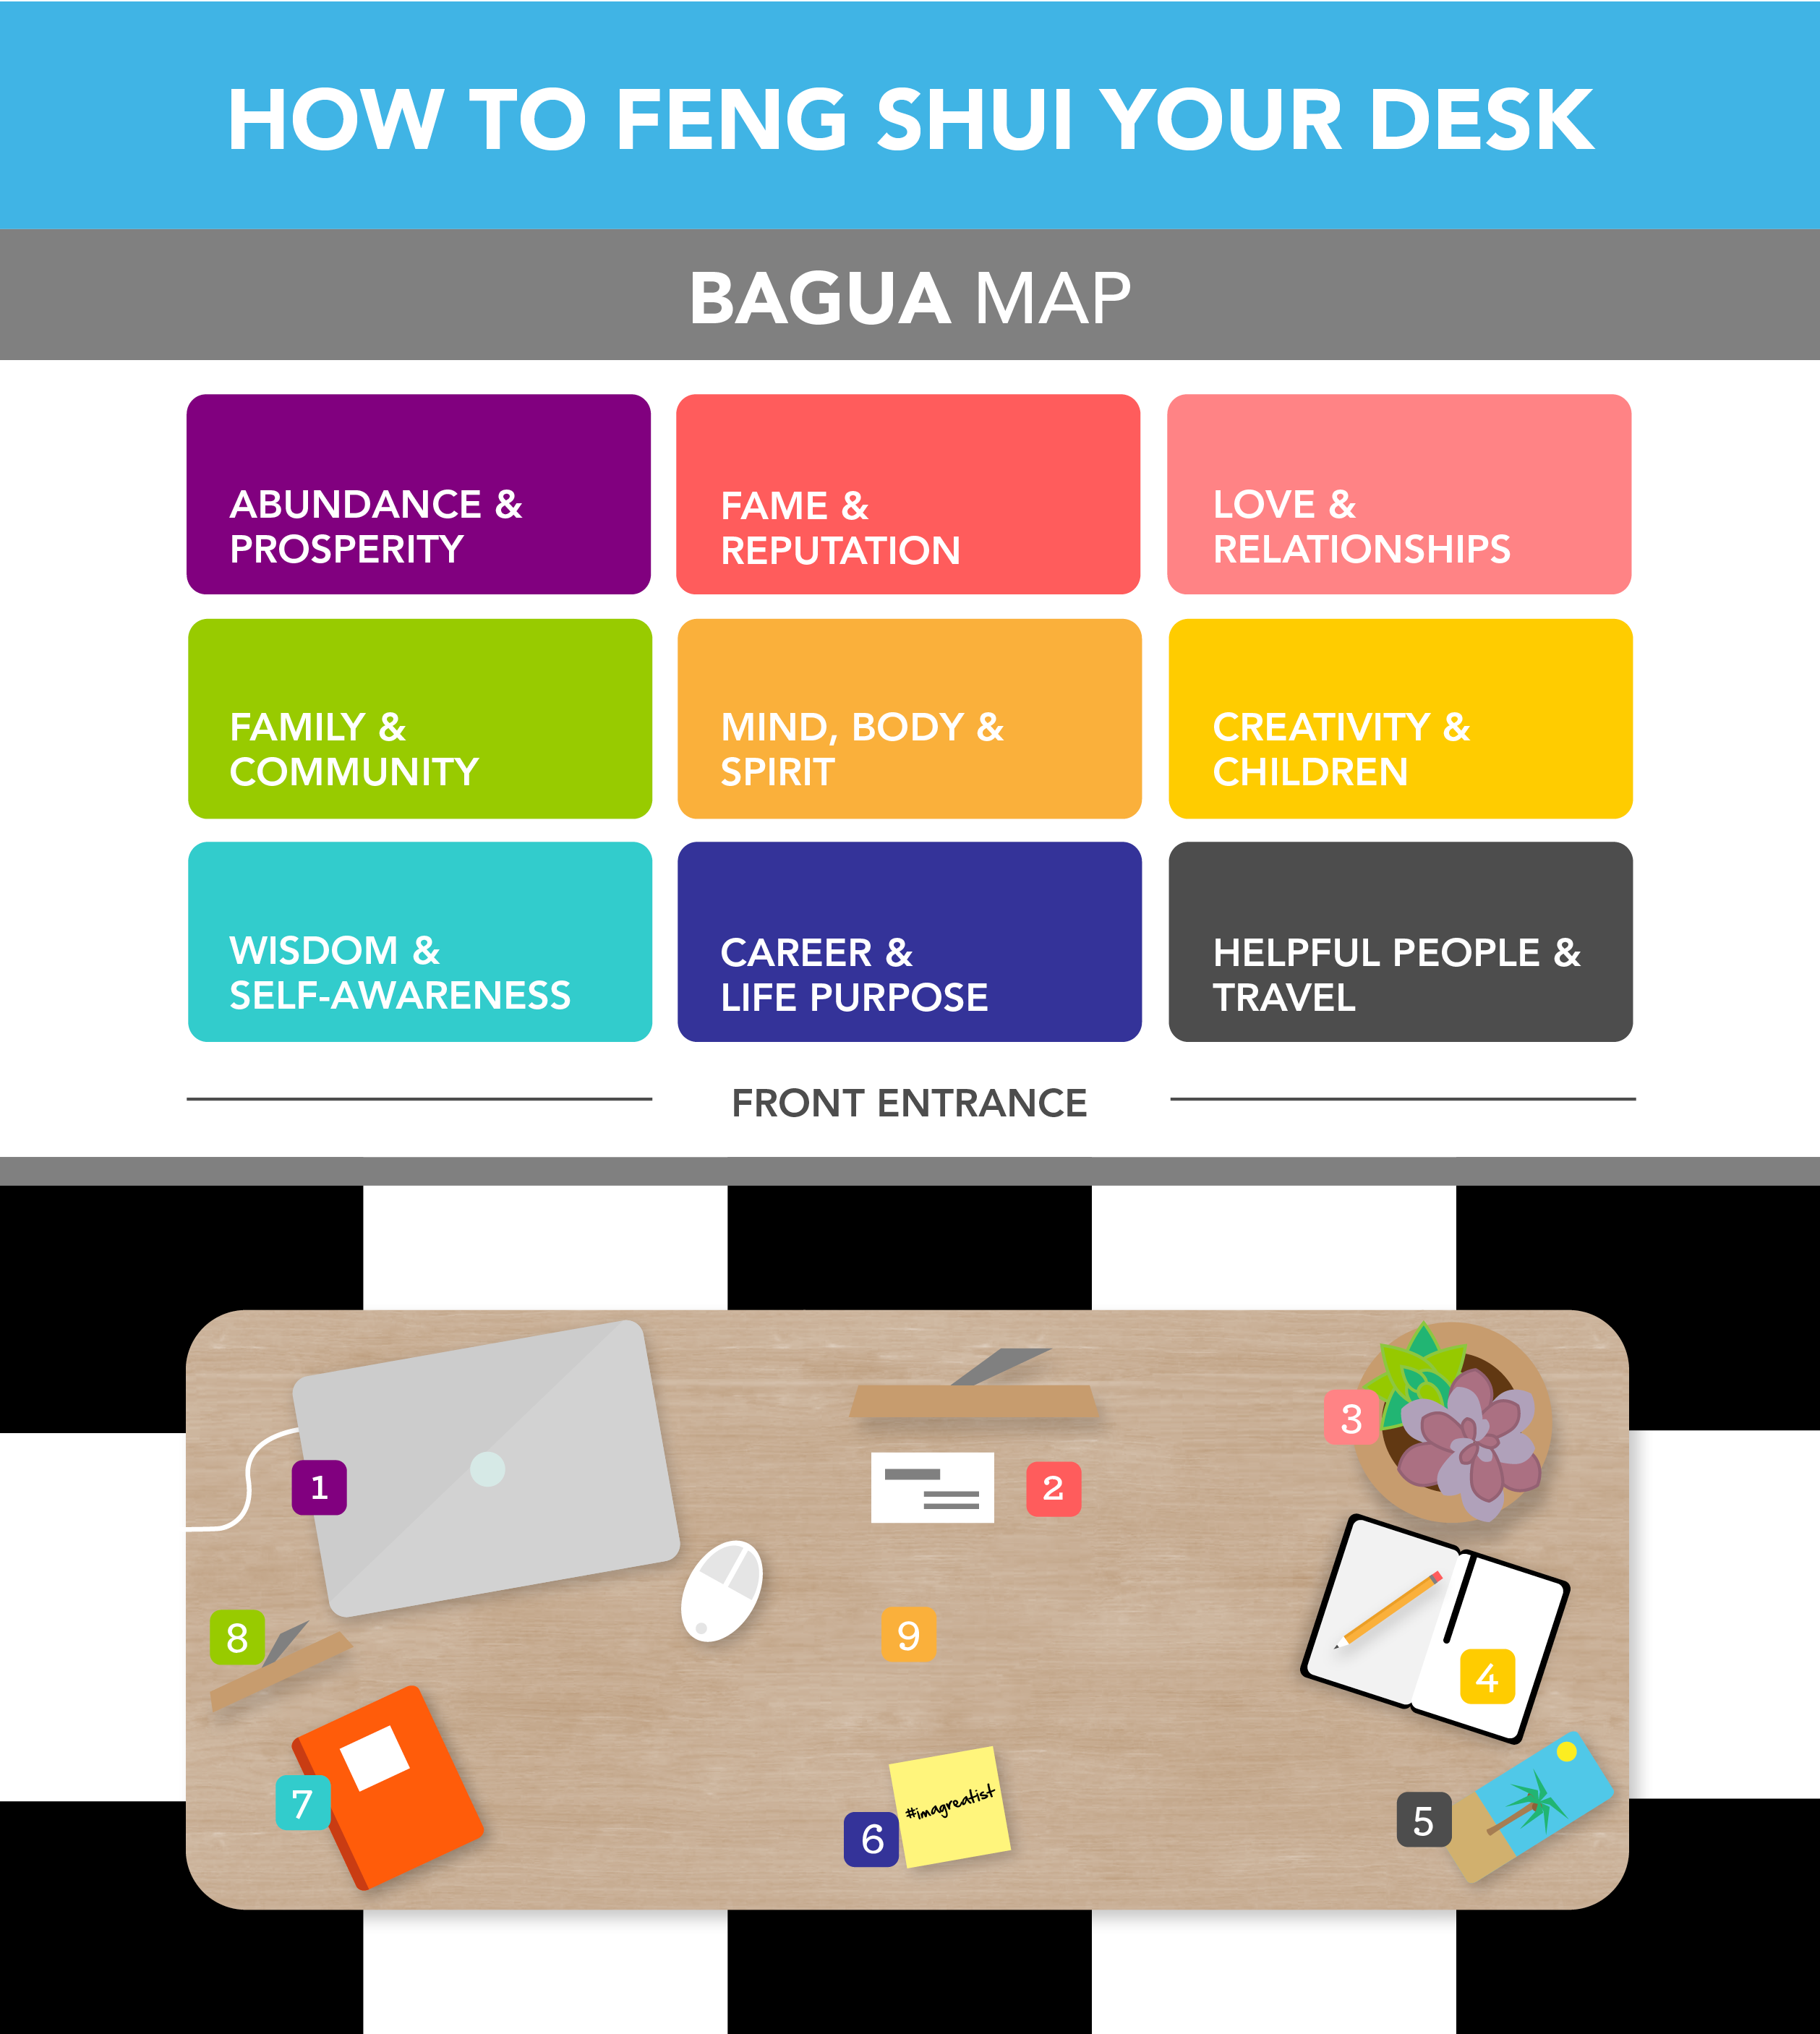 Feng Shui The Ultimate Guide To Designing Your Desk For Success 52f012c755b1a 